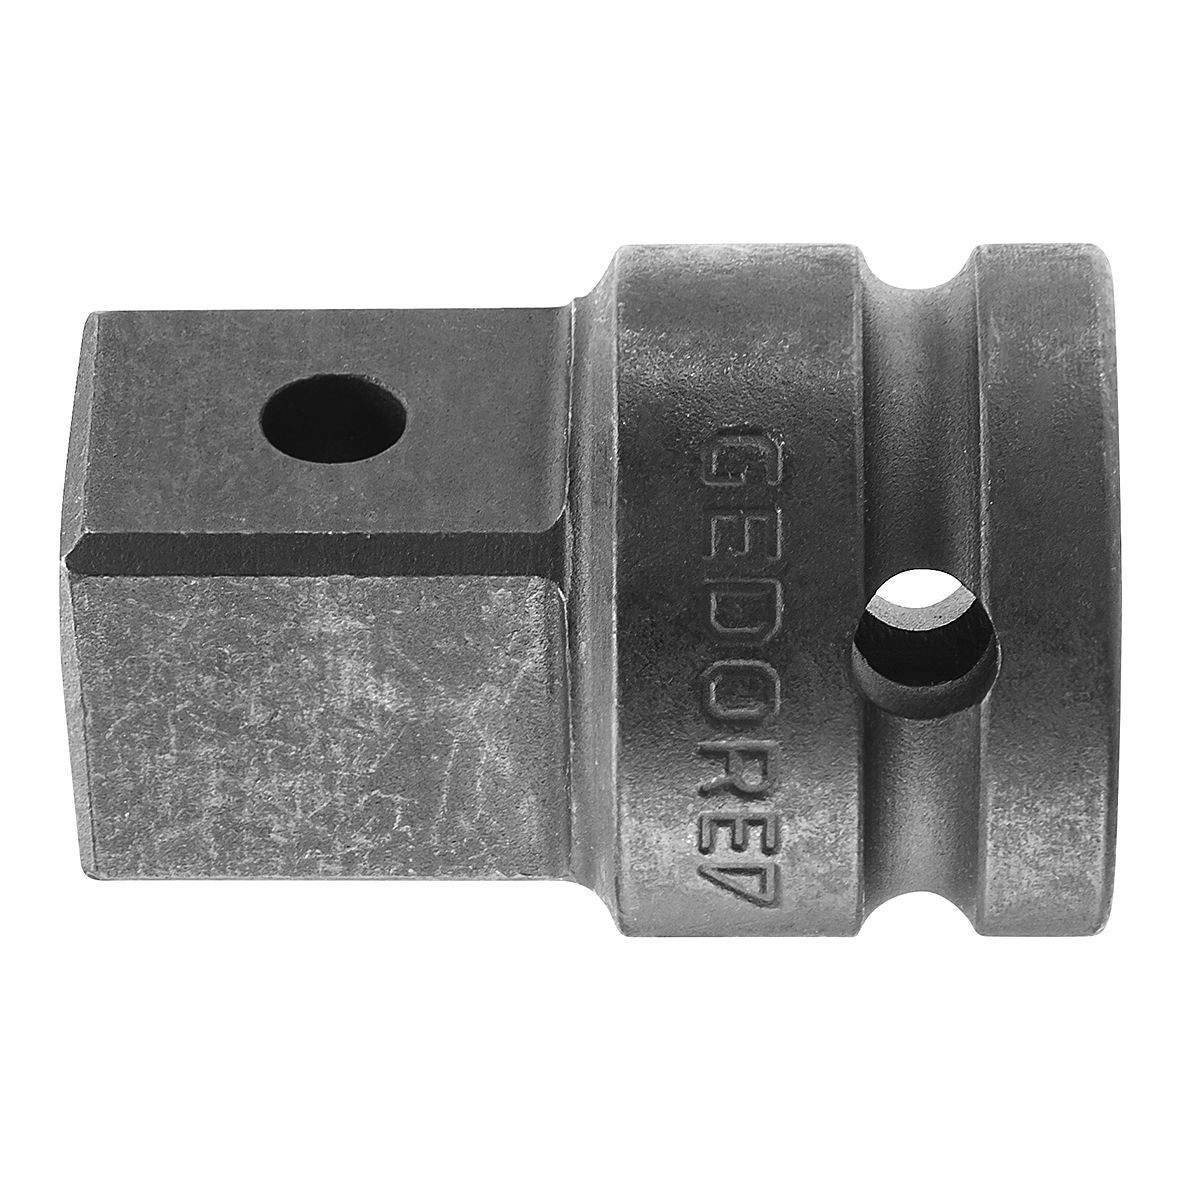 GEDORE KB 1932 - Impact Expander 1/2" to 3/4" (6650020)